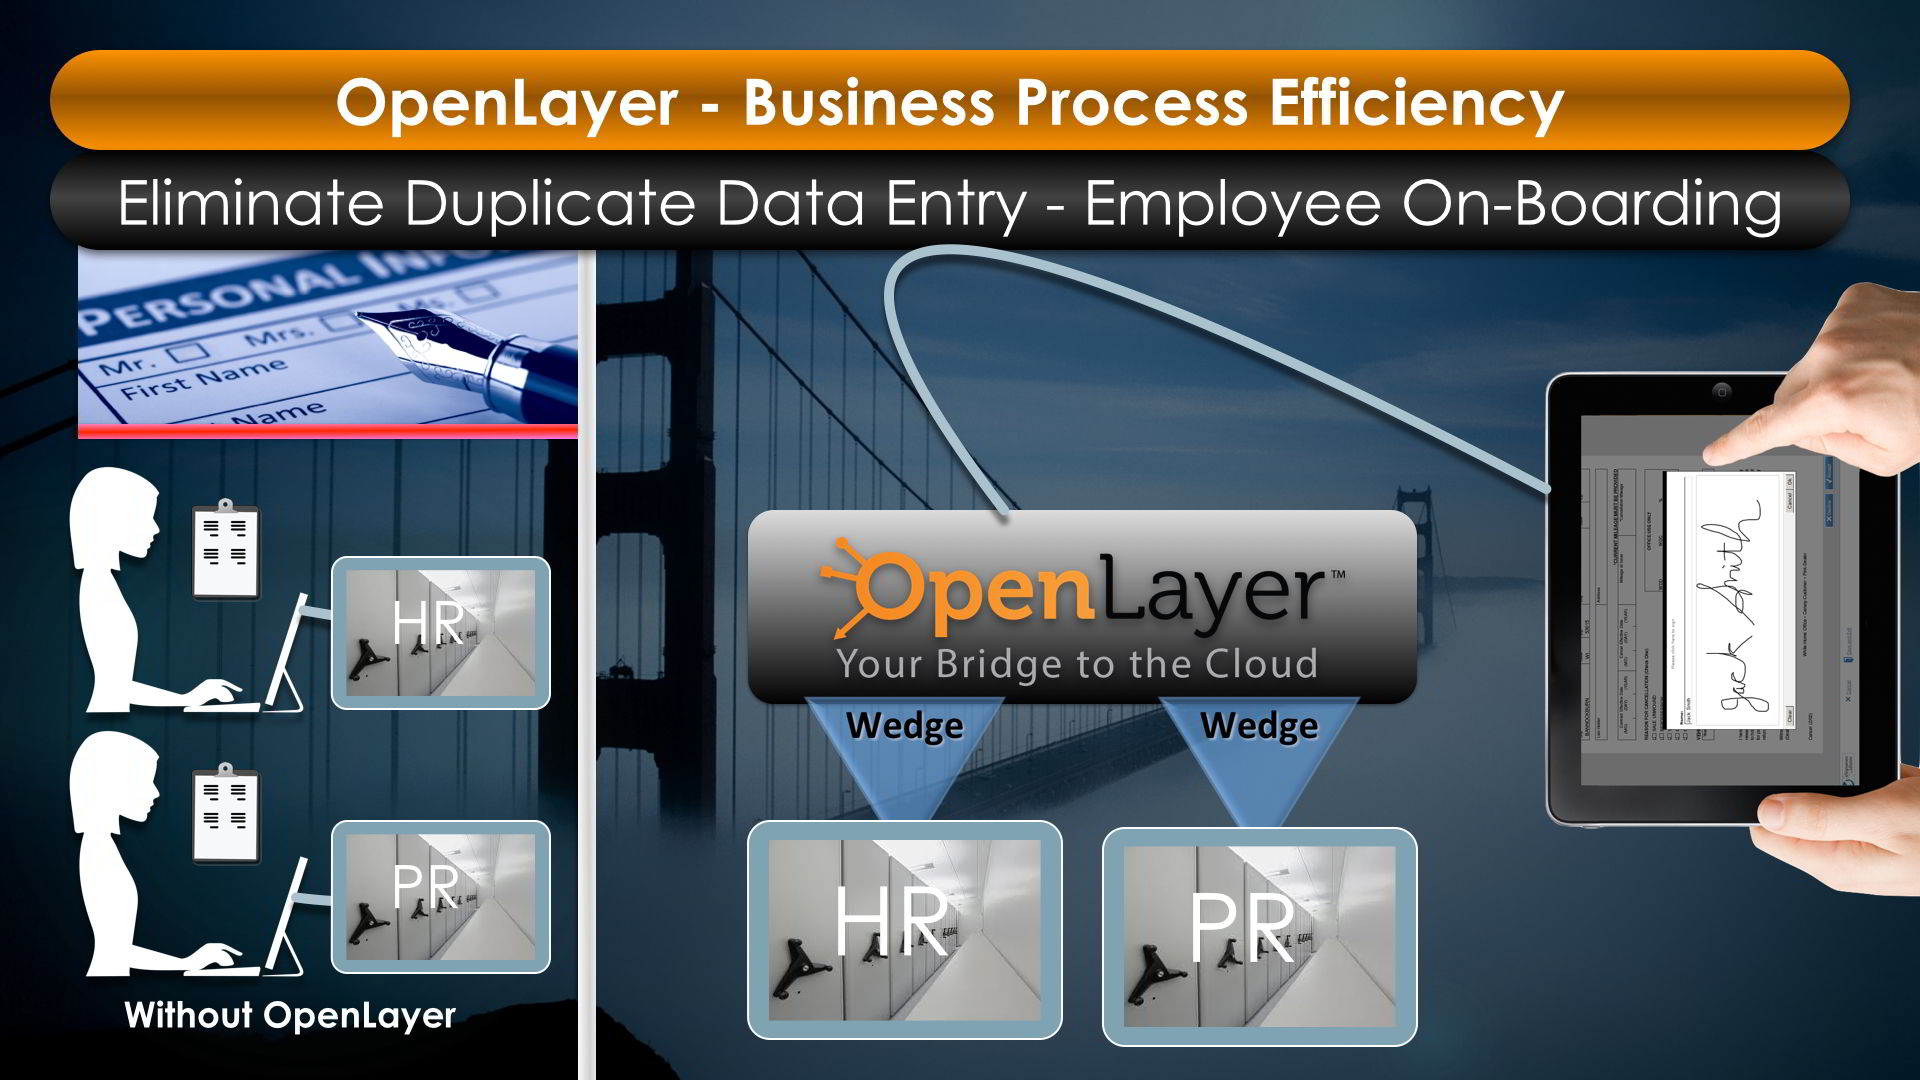 OpenLayer, No Duplicate Data Entry